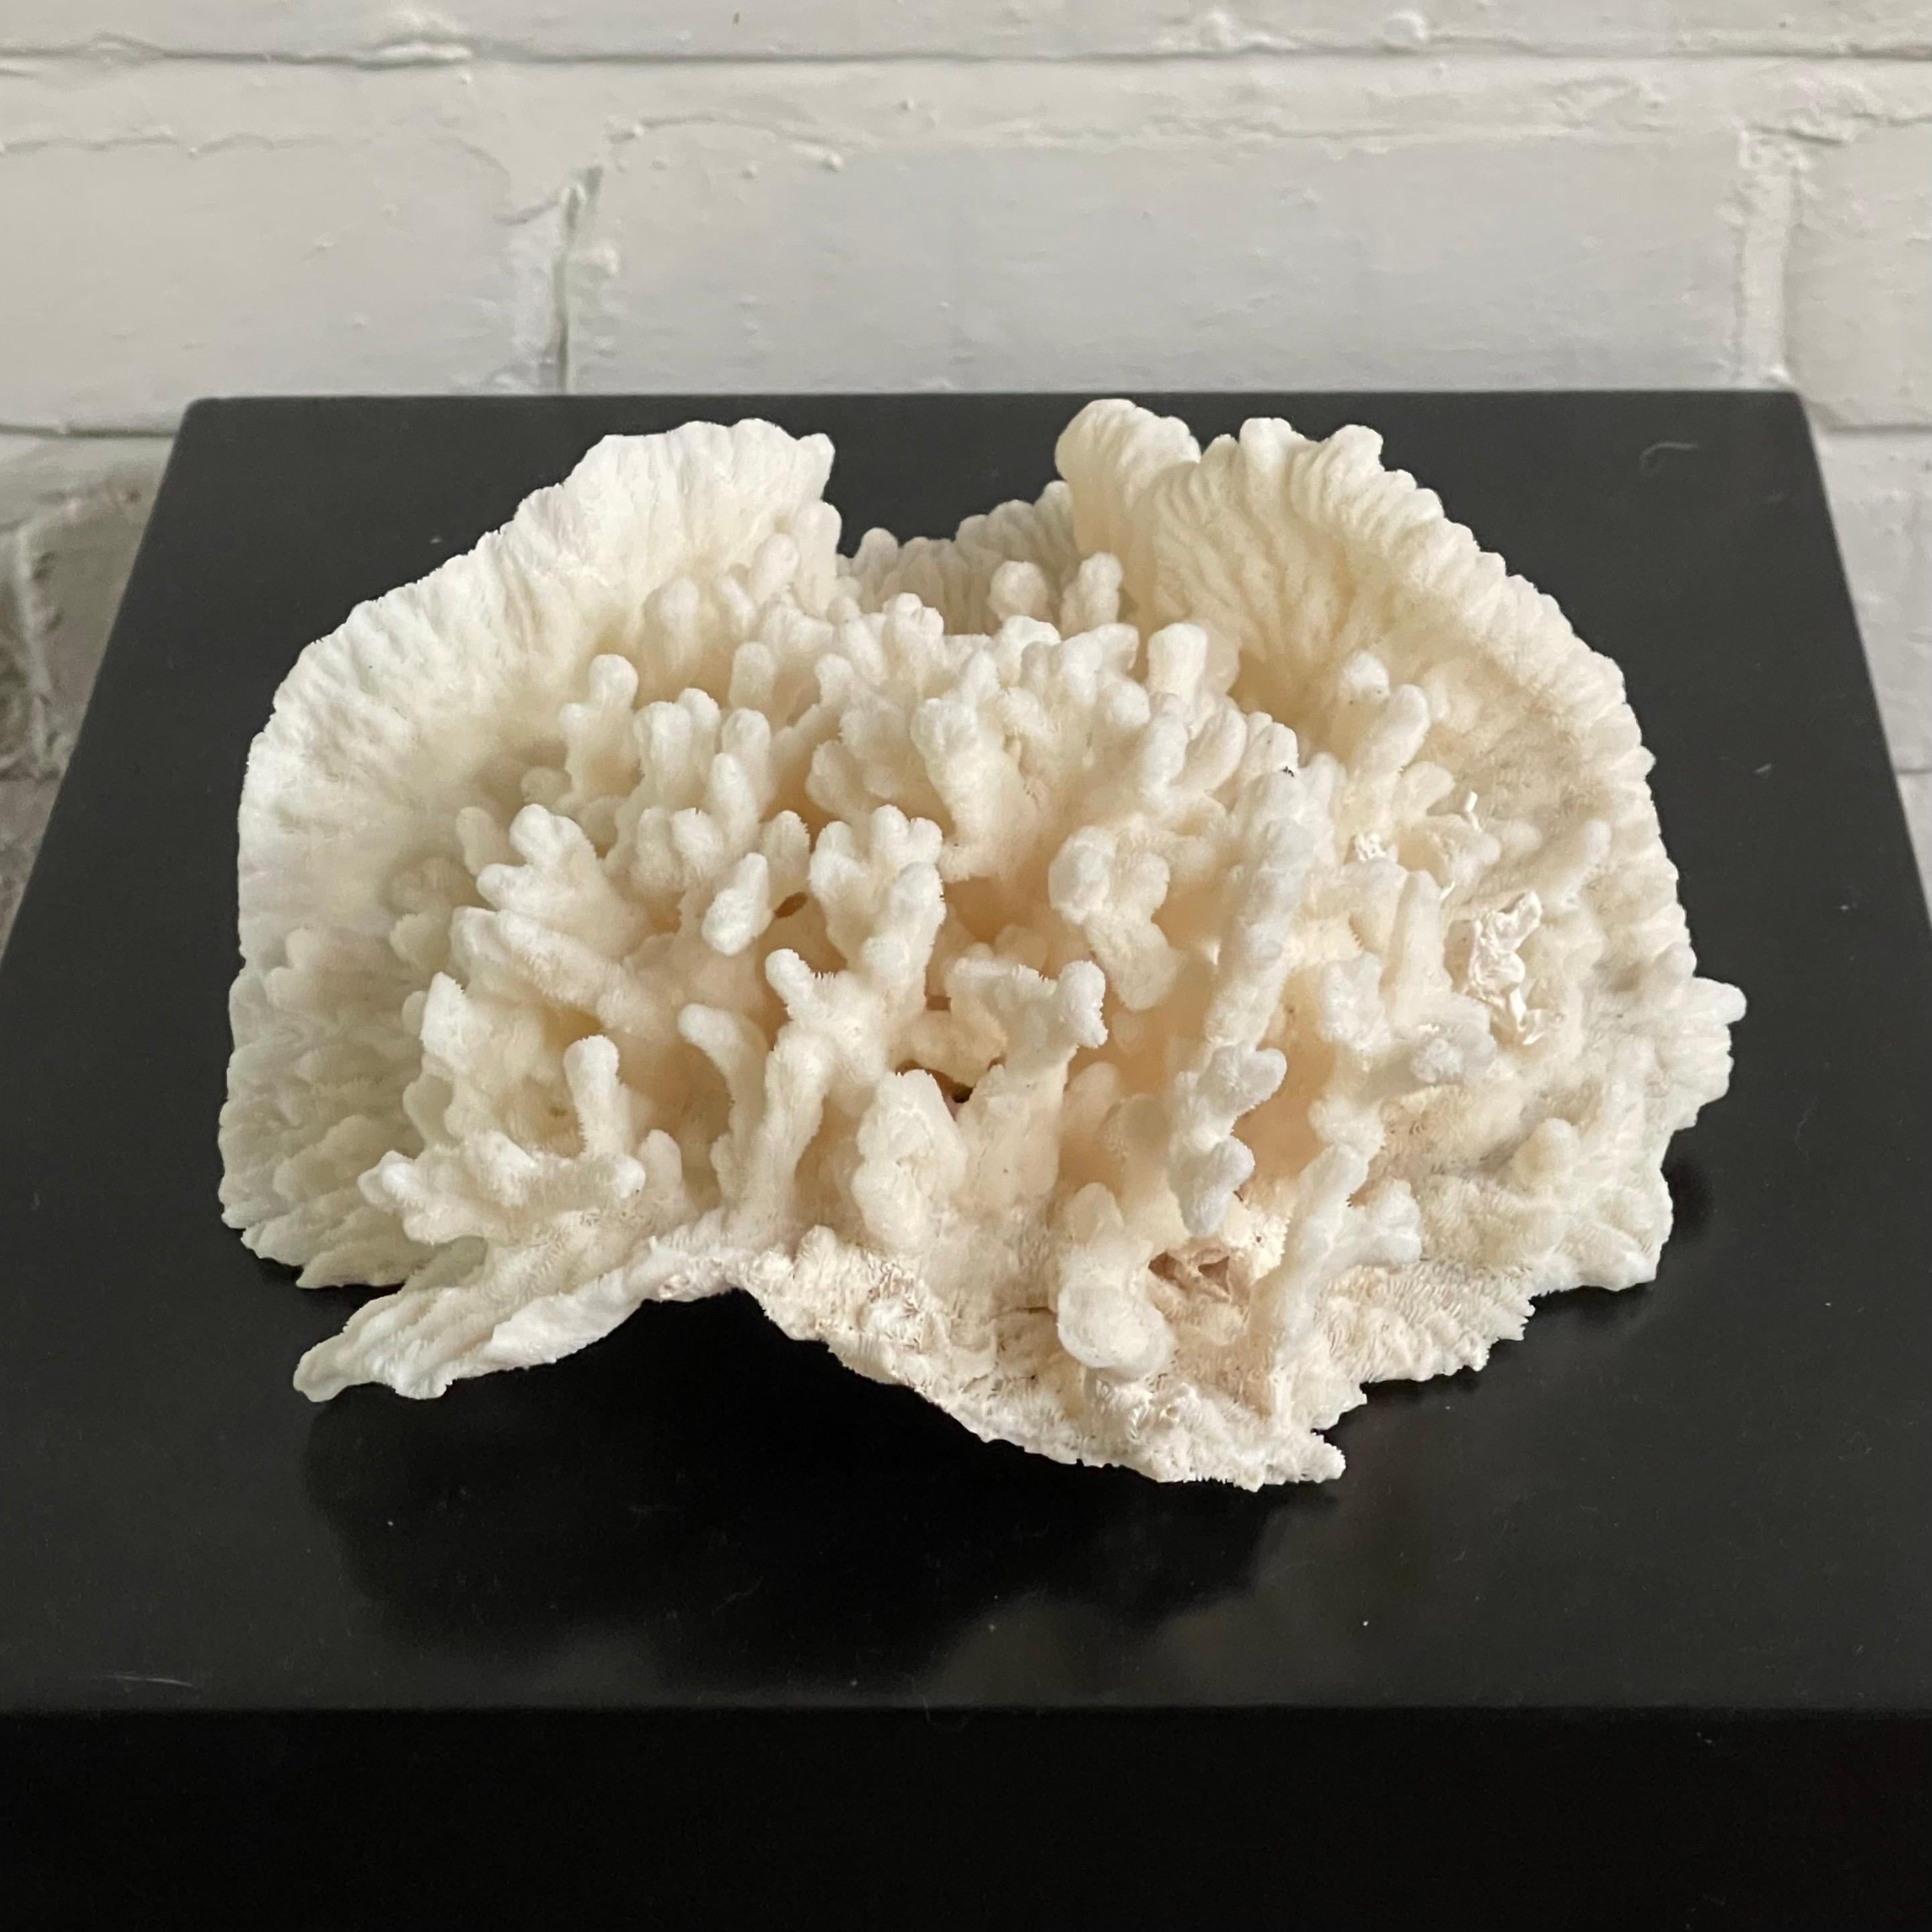 This lovely vintage selection of Merulina coral is an extremely beautiful specimen in terrific condition. The exquisite form offers a variety of textures and shapes and even looks dramatically different depending on its orientation to the viewer.